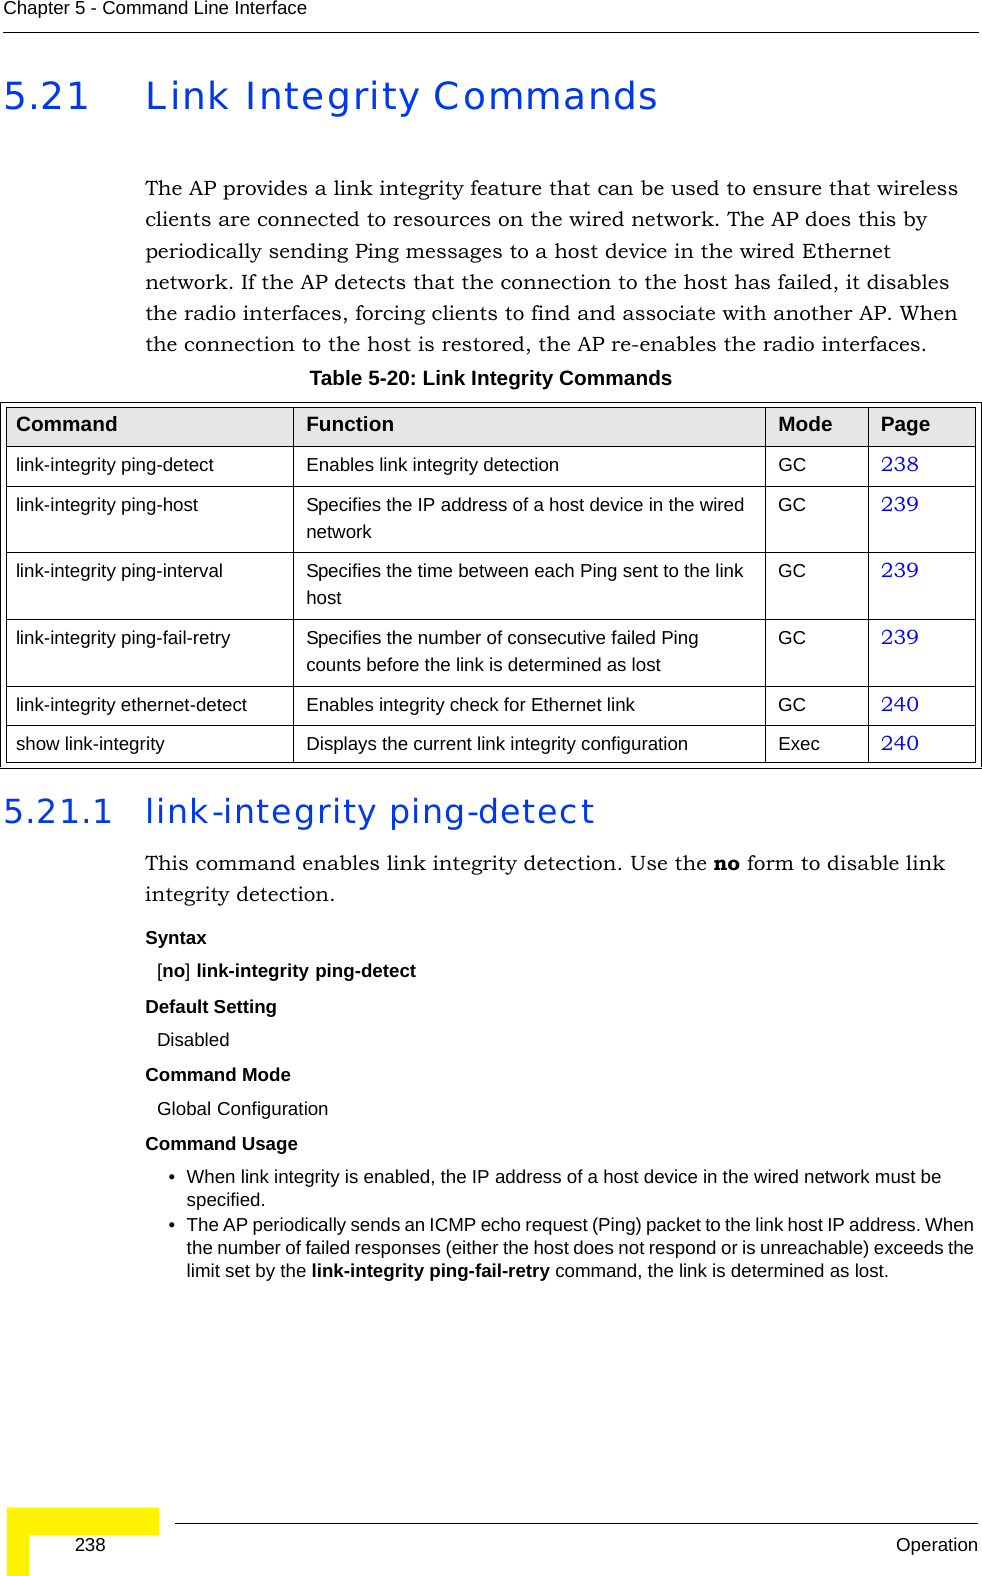  238 OperationChapter 5 - Command Line Interface5.21 Link Integrity CommandsThe AP provides a link integrity feature that can be used to ensure that wireless clients are connected to resources on the wired network. The AP does this by periodically sending Ping messages to a host device in the wired Ethernet network. If the AP detects that the connection to the host has failed, it disables the radio interfaces, forcing clients to find and associate with another AP. When the connection to the host is restored, the AP re-enables the radio interfaces.5.21.1 link-integrity ping-detectThis command enables link integrity detection. Use the no form to disable link integrity detection.Syntax[no] link-integrity ping-detectDefault SettingDisabledCommand Mode Global ConfigurationCommand Usage • When link integrity is enabled, the IP address of a host device in the wired network must be specified.• The AP periodically sends an ICMP echo request (Ping) packet to the link host IP address. When the number of failed responses (either the host does not respond or is unreachable) exceeds the limit set by the link-integrity ping-fail-retry command, the link is determined as lost.Table 5-20: Link Integrity CommandsCommand Function Mode Pagelink-integrity ping-detect Enables link integrity detection GC 238link-integrity ping-host Specifies the IP address of a host device in the wired networkGC 239link-integrity ping-interval Specifies the time between each Ping sent to the link hostGC 239link-integrity ping-fail-retry Specifies the number of consecutive failed Ping counts before the link is determined as lostGC 239link-integrity ethernet-detect Enables integrity check for Ethernet link GC 240show link-integrity Displays the current link integrity configuration Exec 240